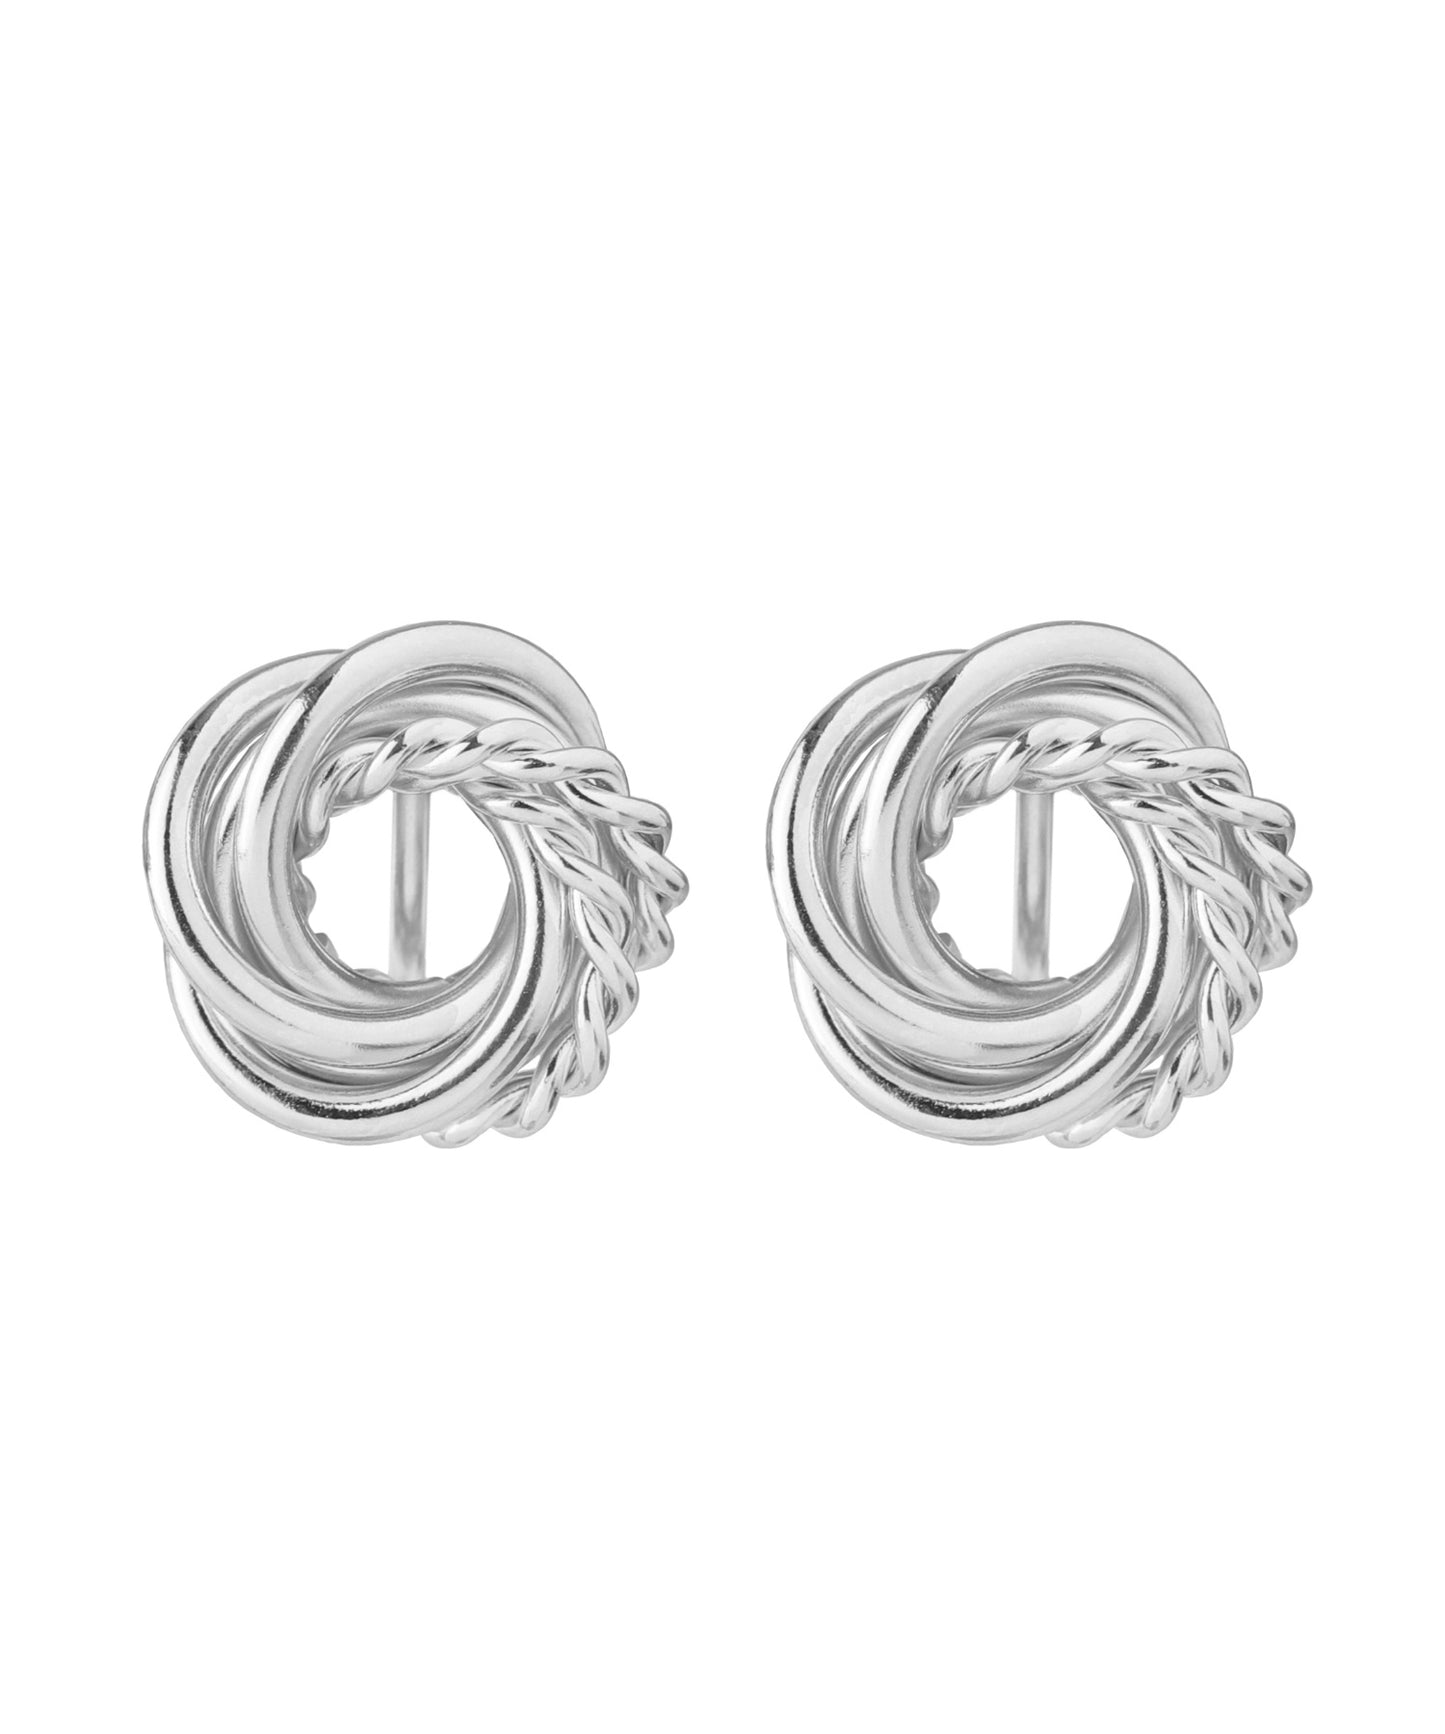 Metal Round Clip On Earrings[Ownideal]